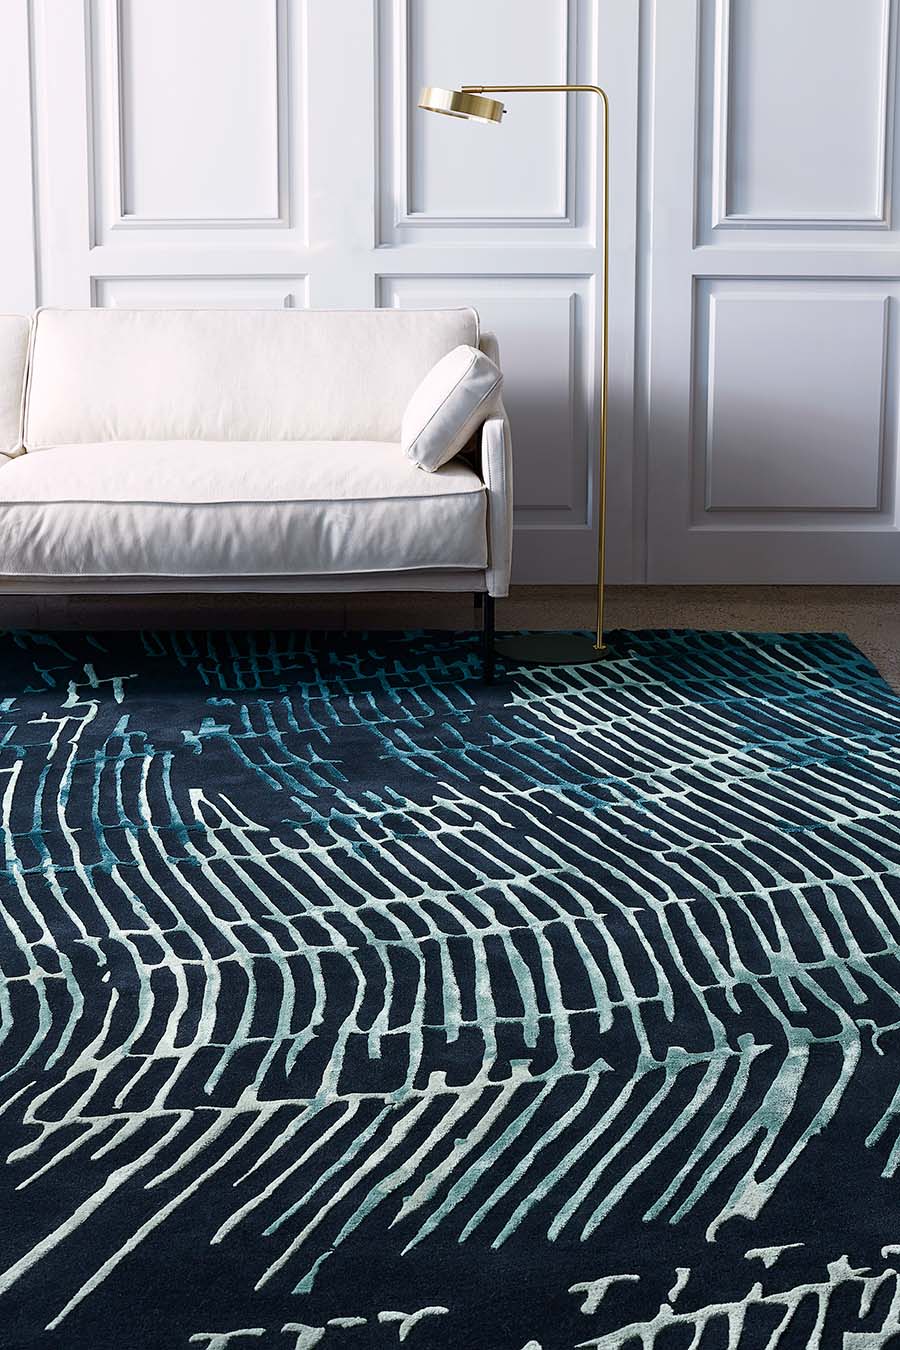 Room setting with our modern, organic patterned Current rug design in green, teal and charcoal